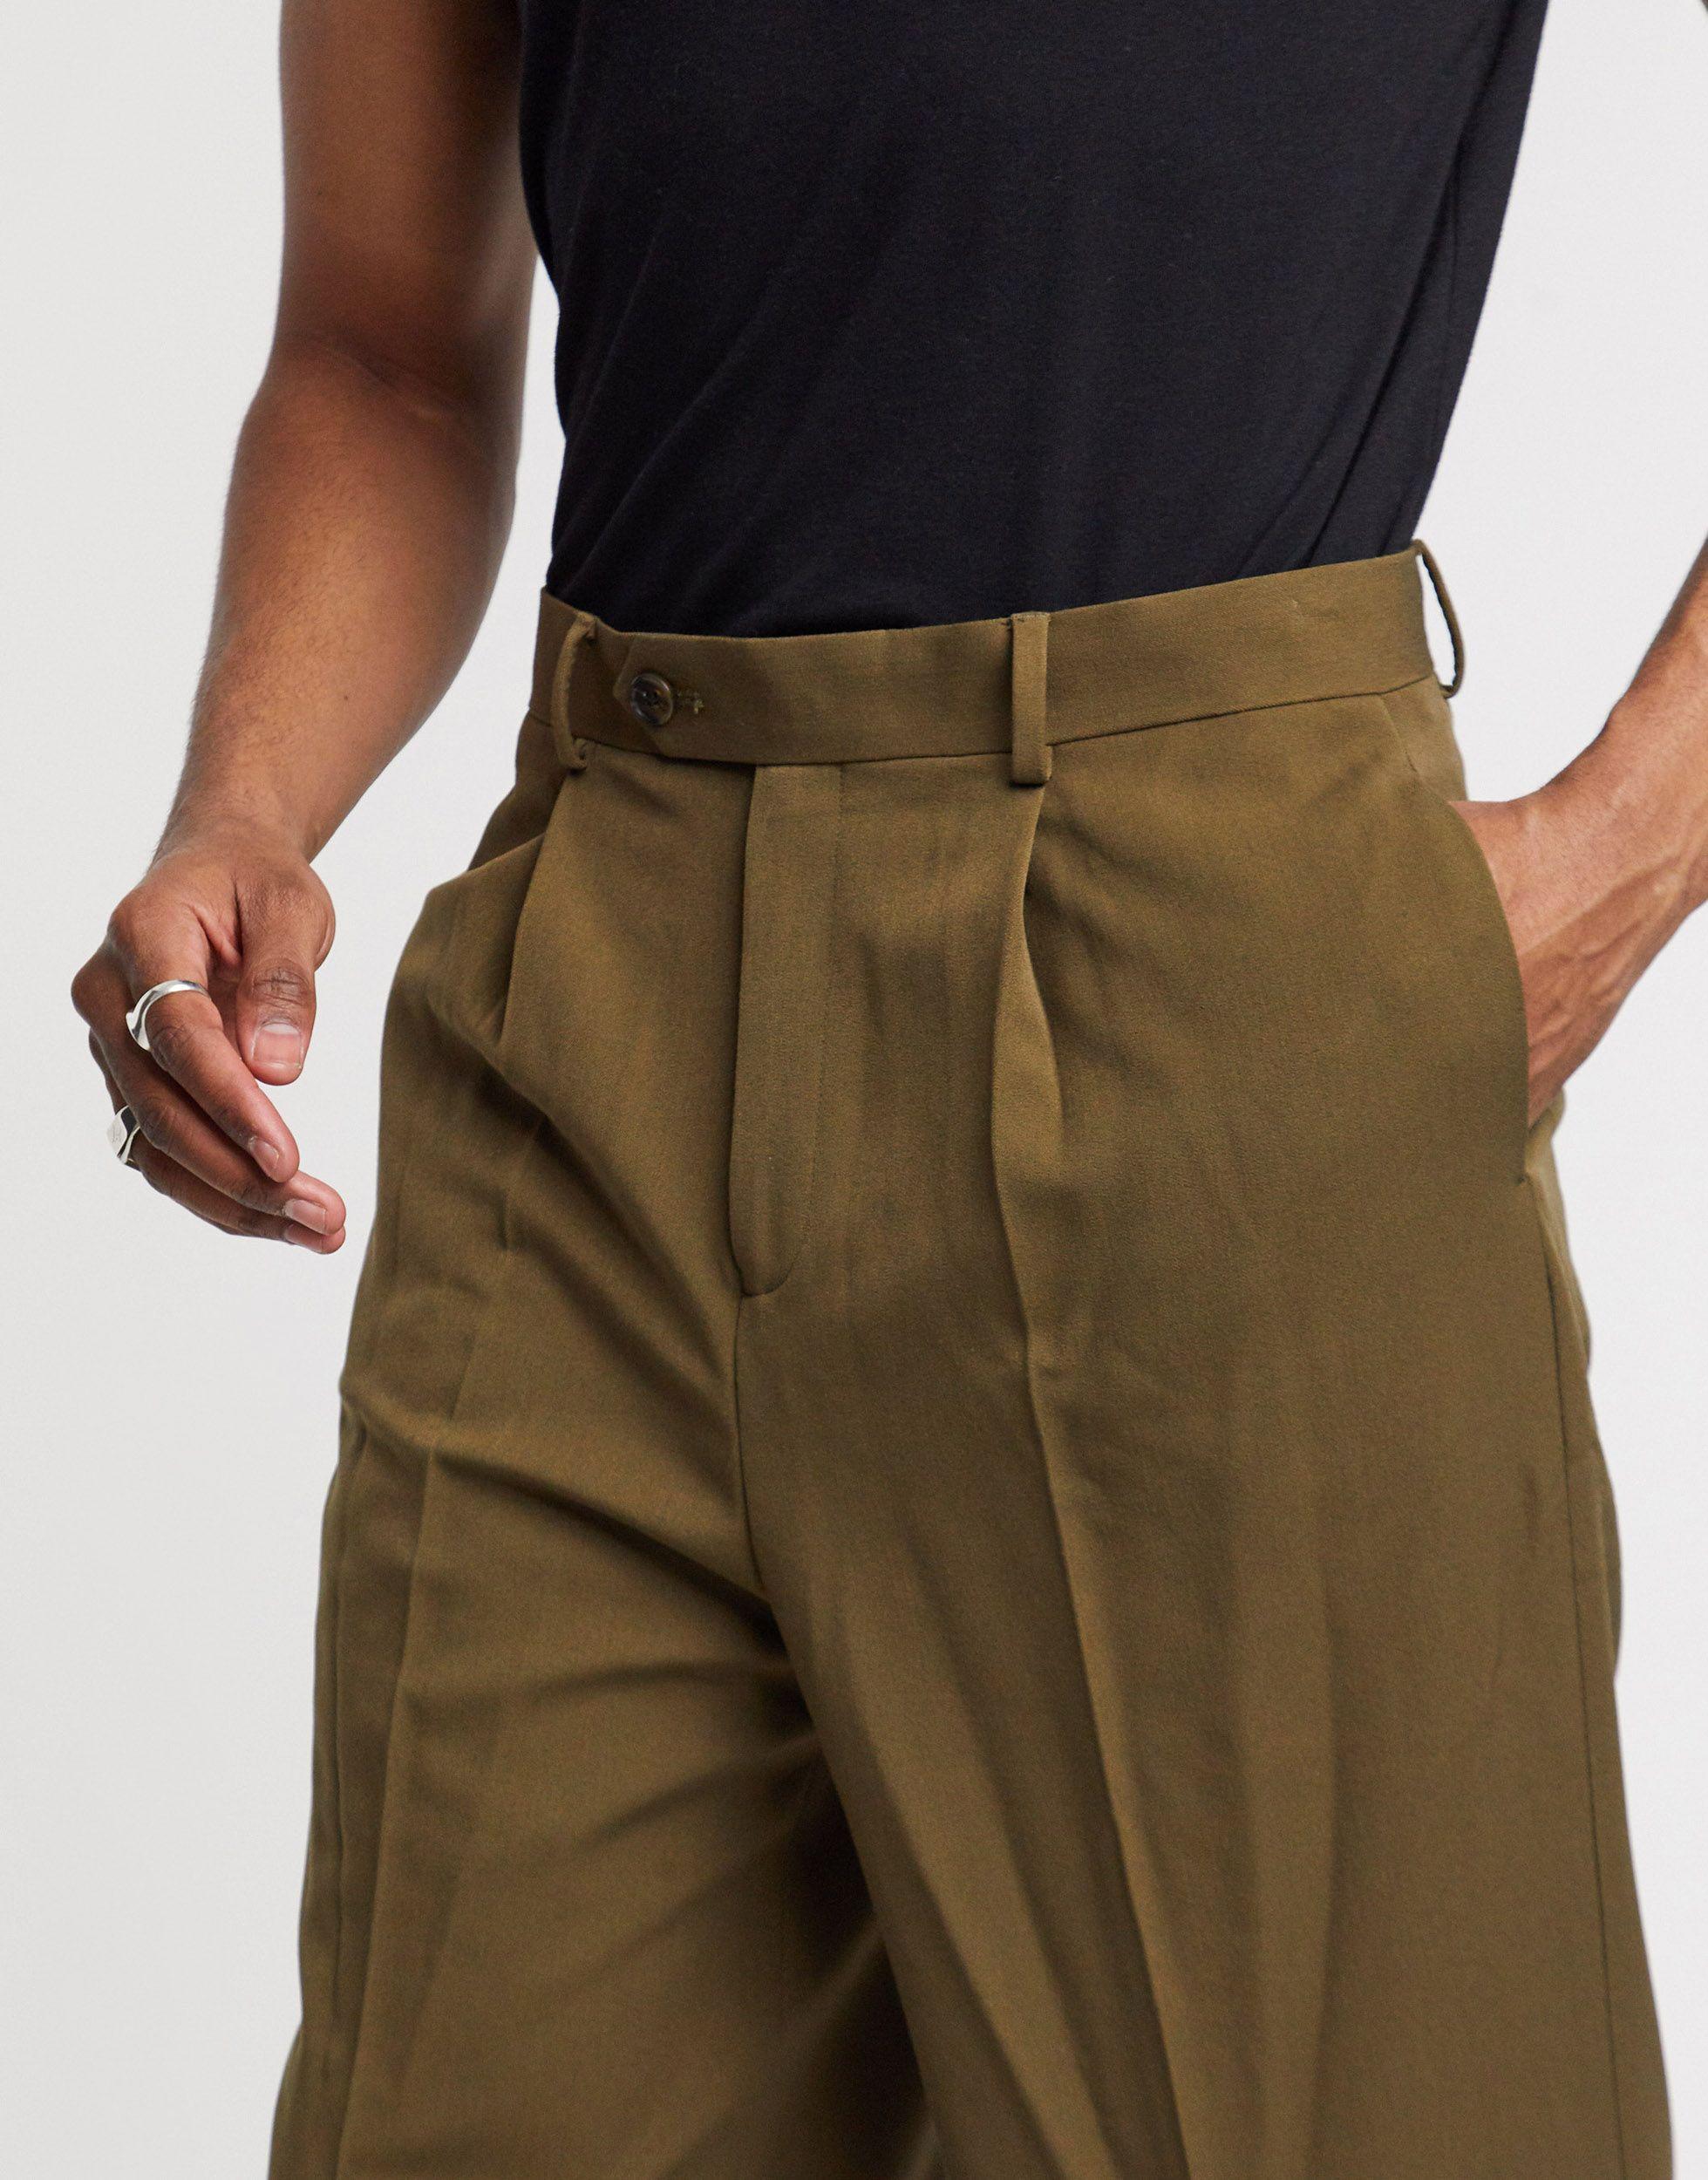 The 13 Best Wrinkle-free Travel Pants Under $40